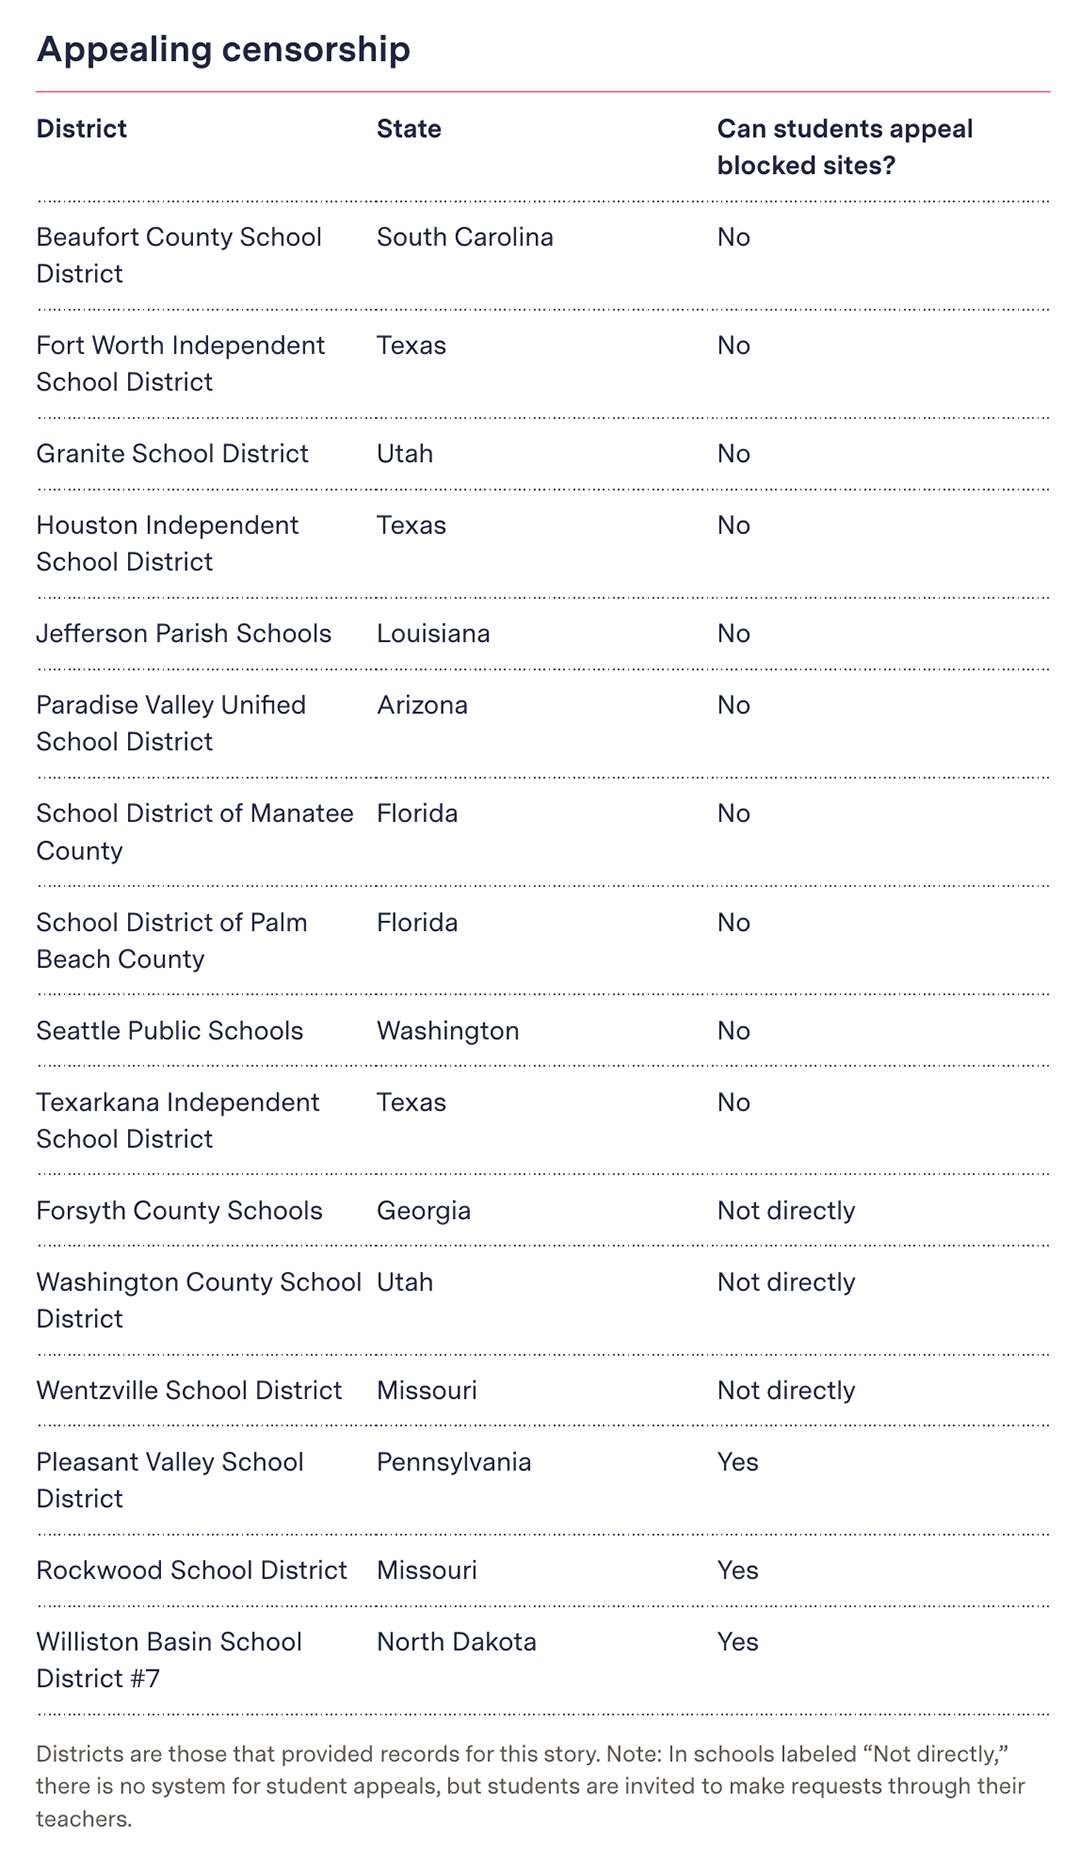 A Table showing some school districts and states where students can and cannot appeal censorship.